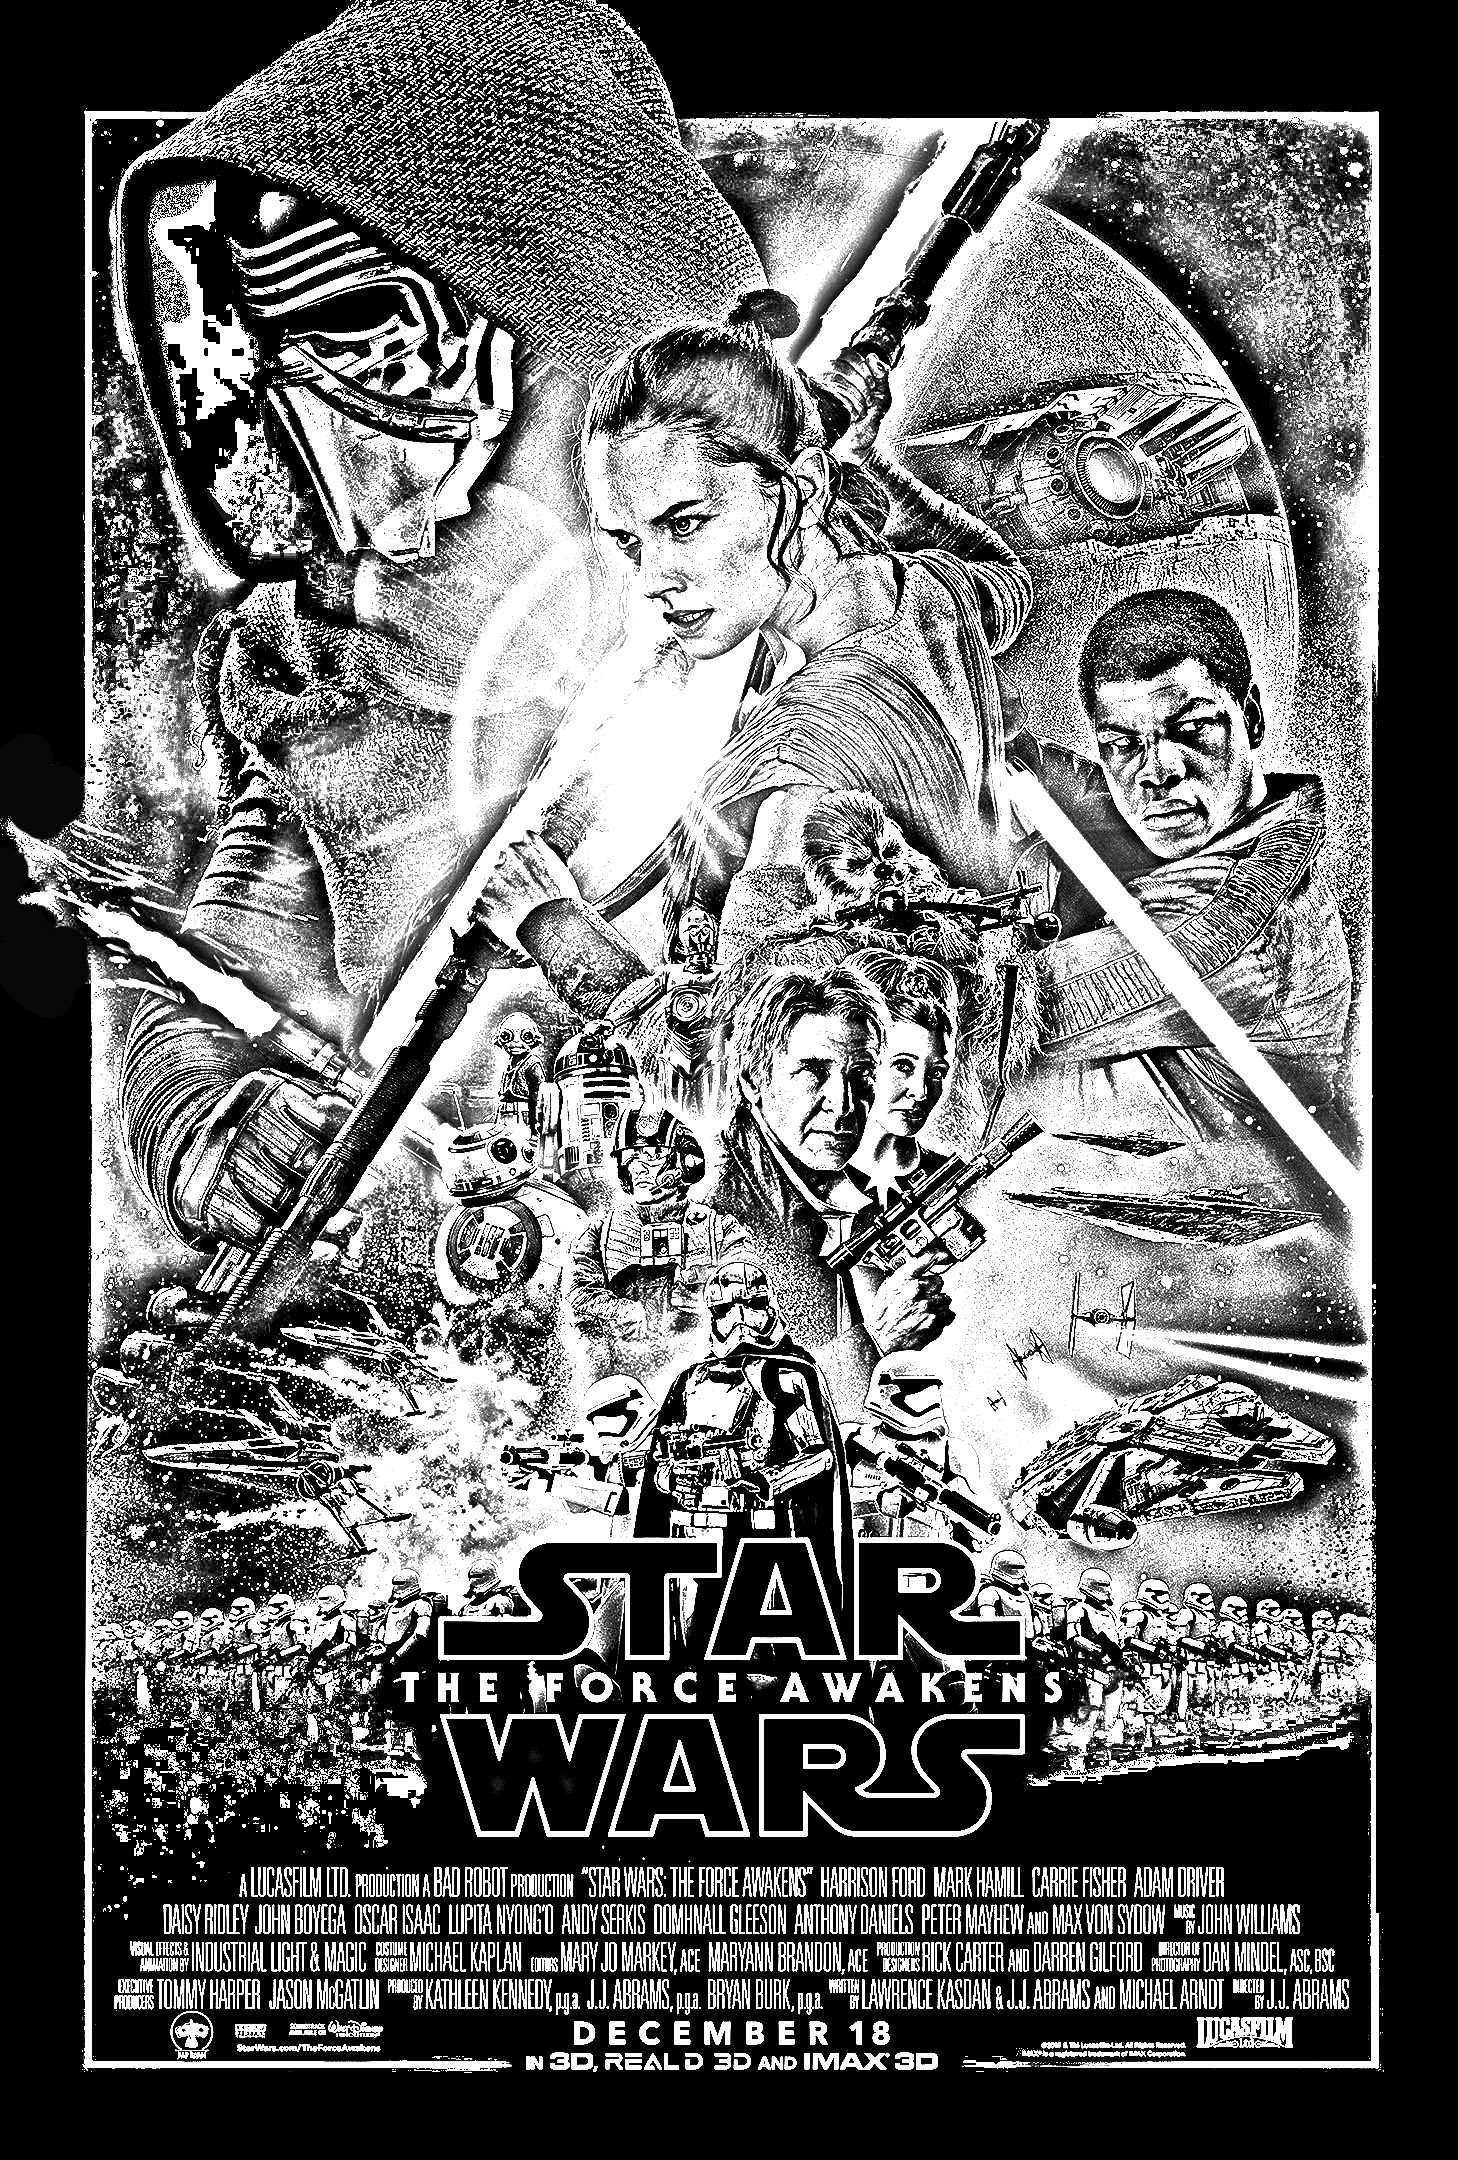 Coloring page inspired by the Movie poster of Star Wars The force awekens